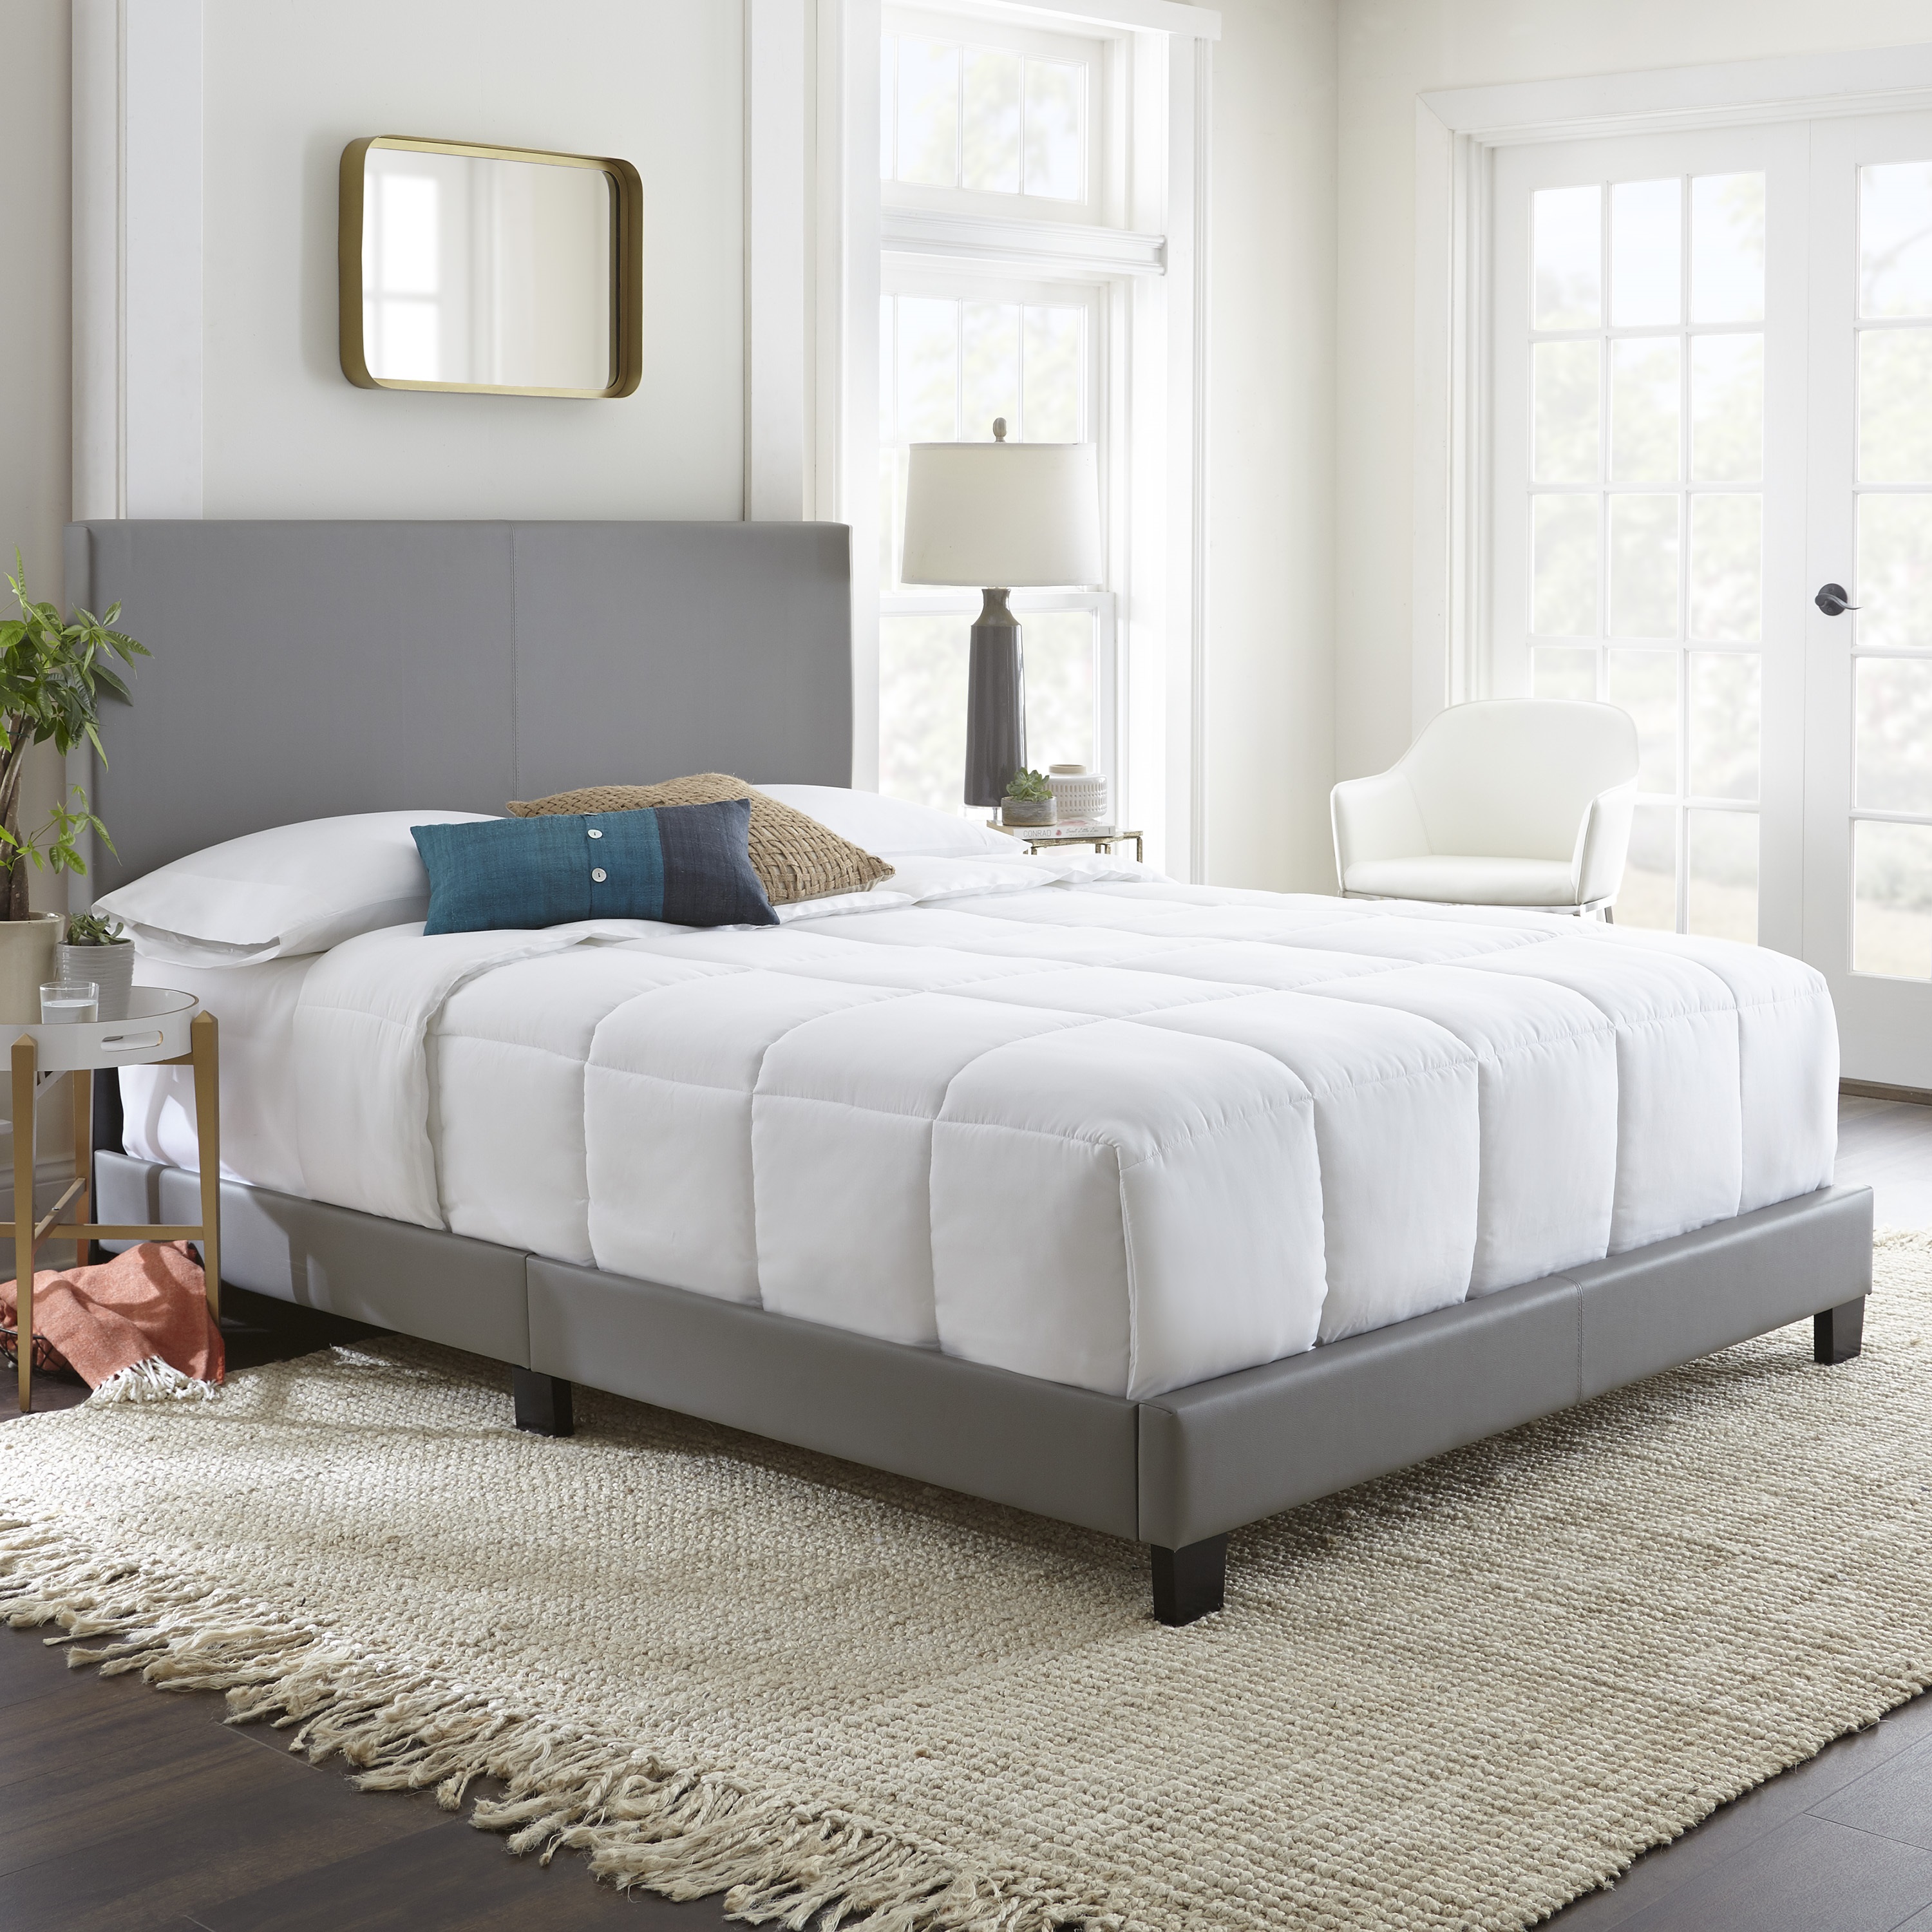 Boyd Sleep Florence King Upholstered Platform Bed, Box Spring Required, Gray Faux Leather - image 2 of 10